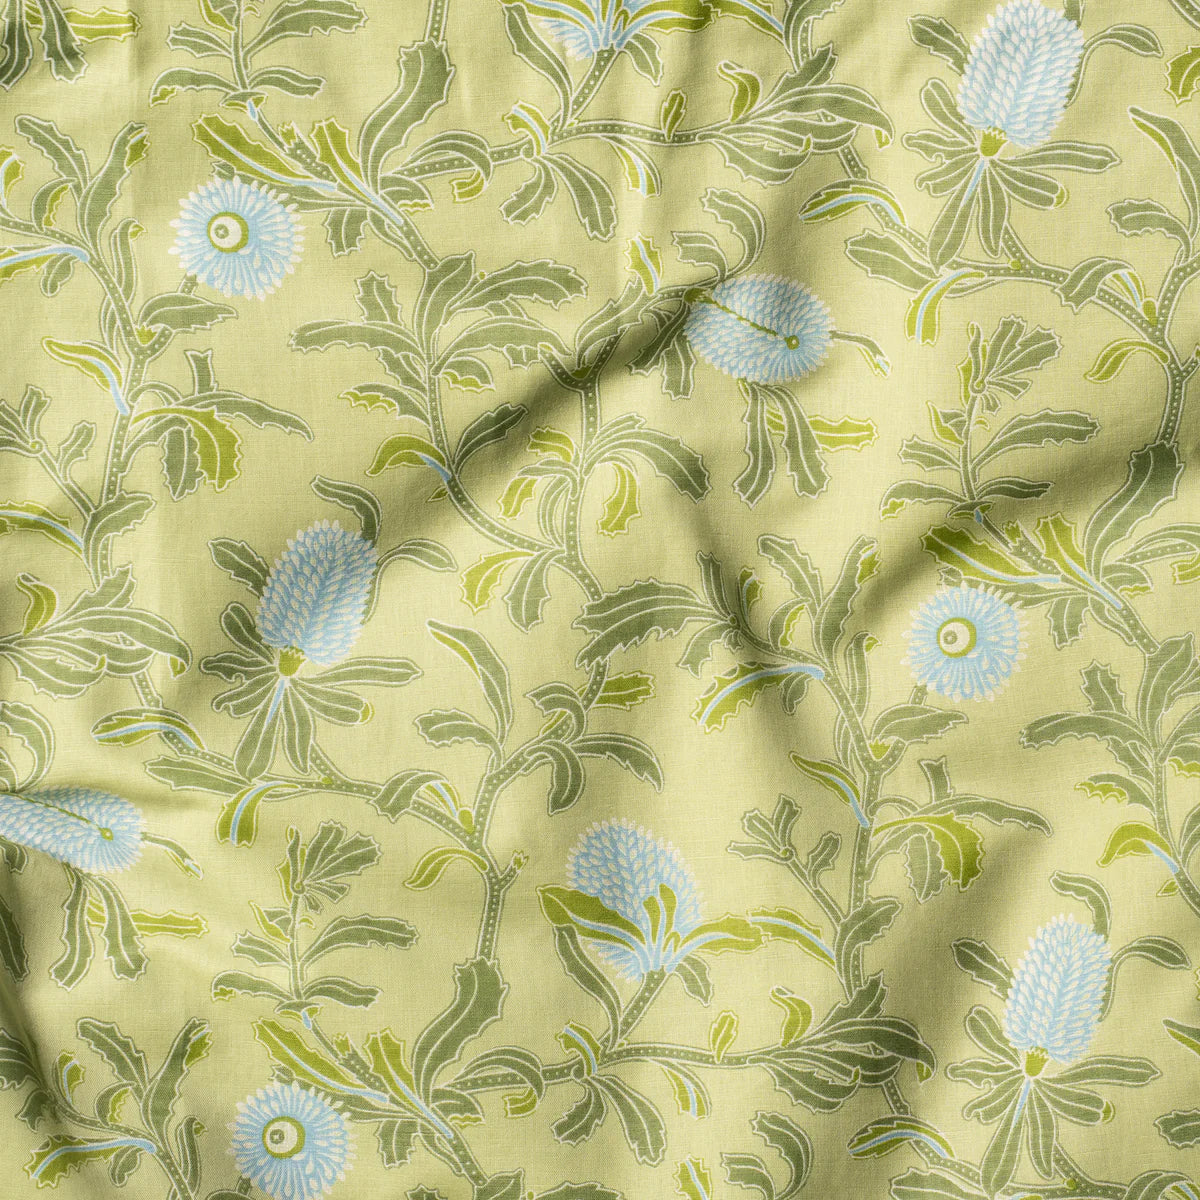 Draped fabric in a floral print in shades of blue and green on a yellow field.